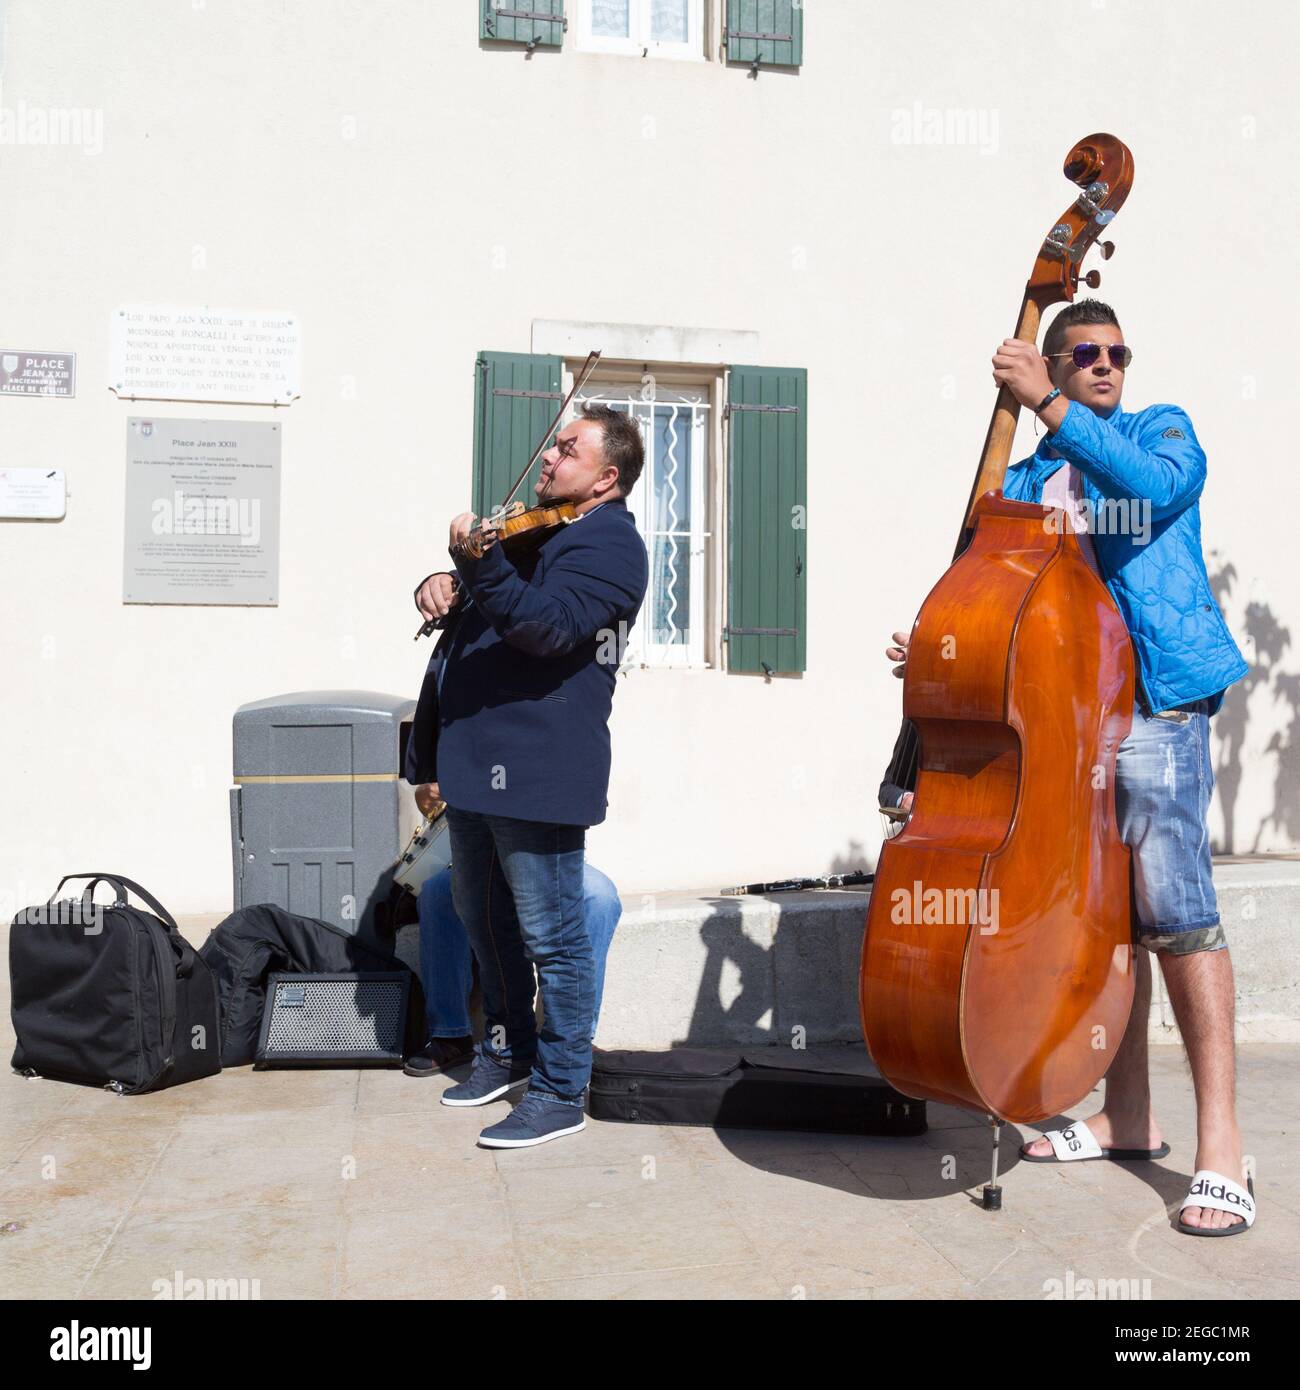 France Saintes Maries De La Mer Romani men playing traditional music in the street during the annual prilgrimage in May. Stock Photo